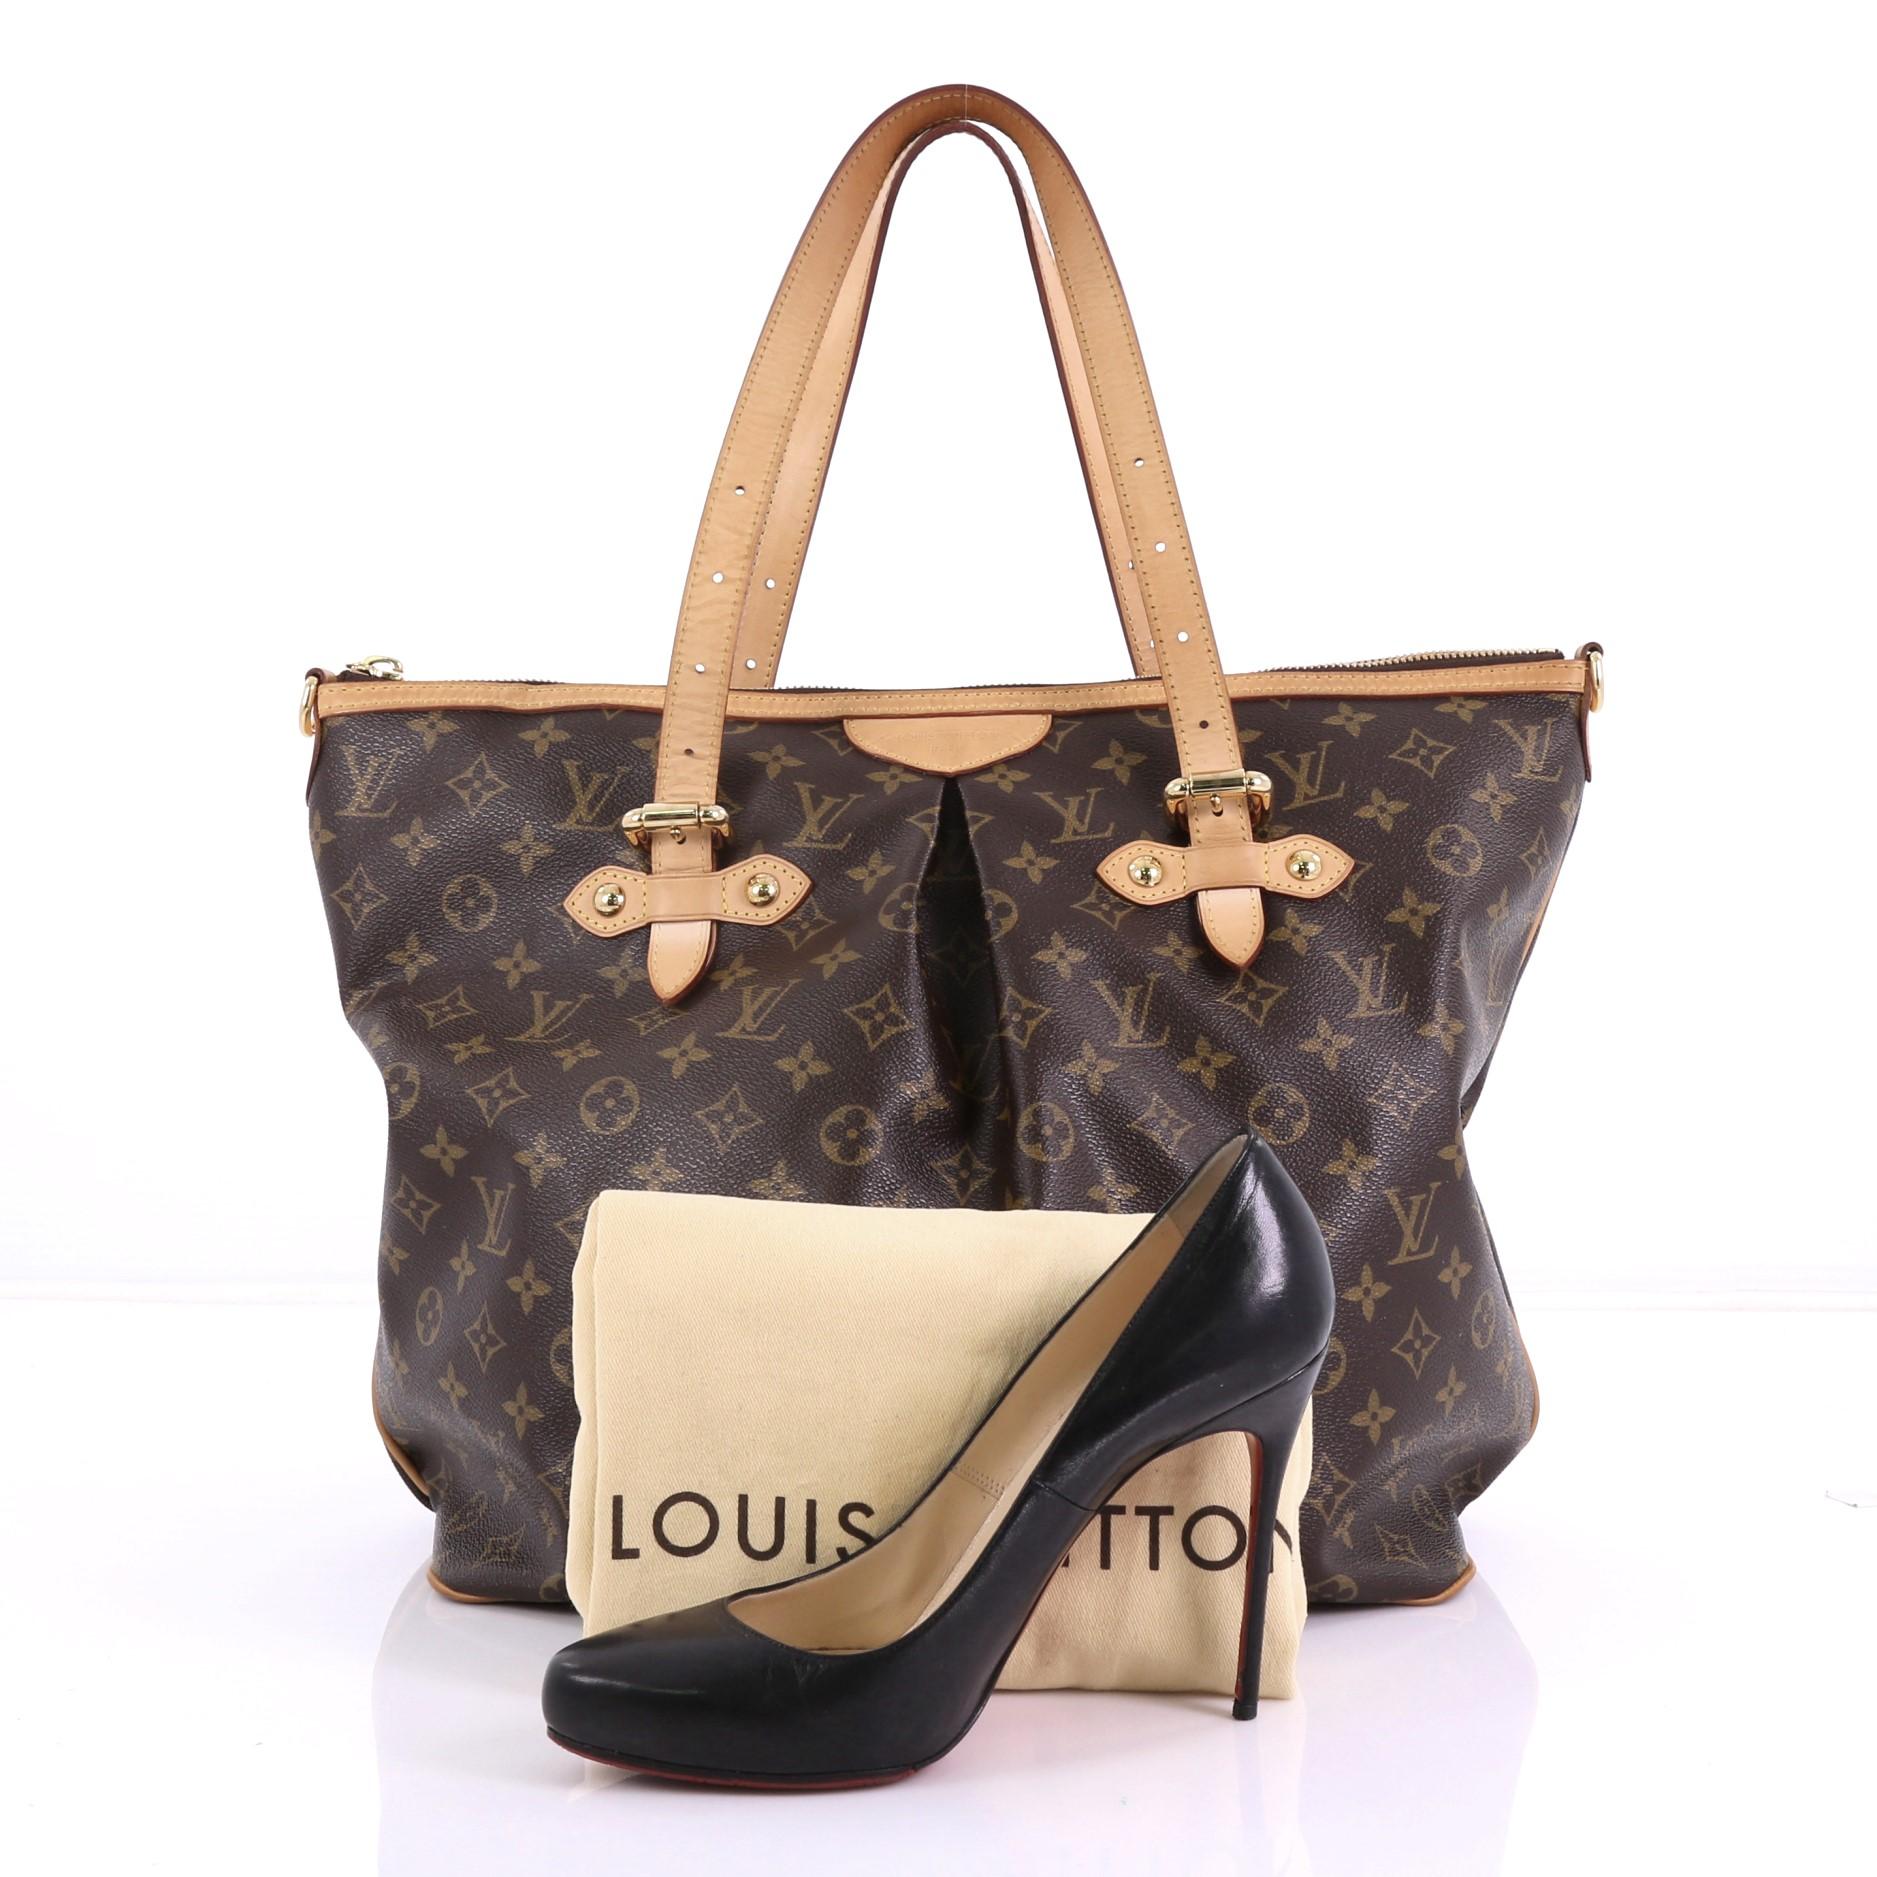 This Louis Vuitton Palermo Handbag Monogram Canvas GM, crafted in brown monogram coated canvas and vachetta leather trim, features adjustable handles, inverted pleating, and gold-tone hardware. Its zip closure opens to a brown fabric interior with